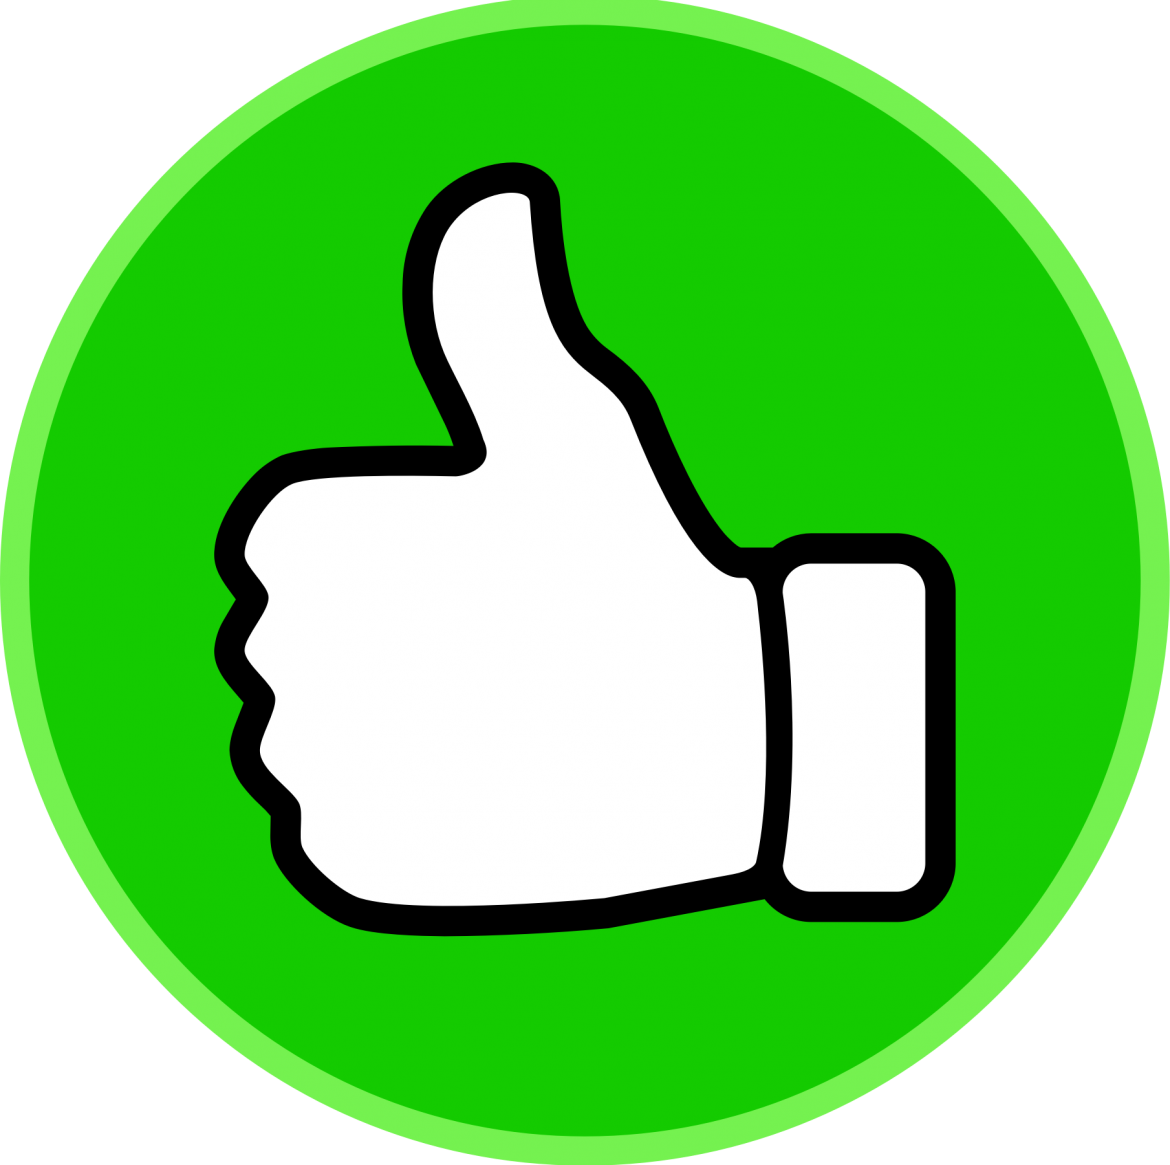 thumbs up clipart in green circle